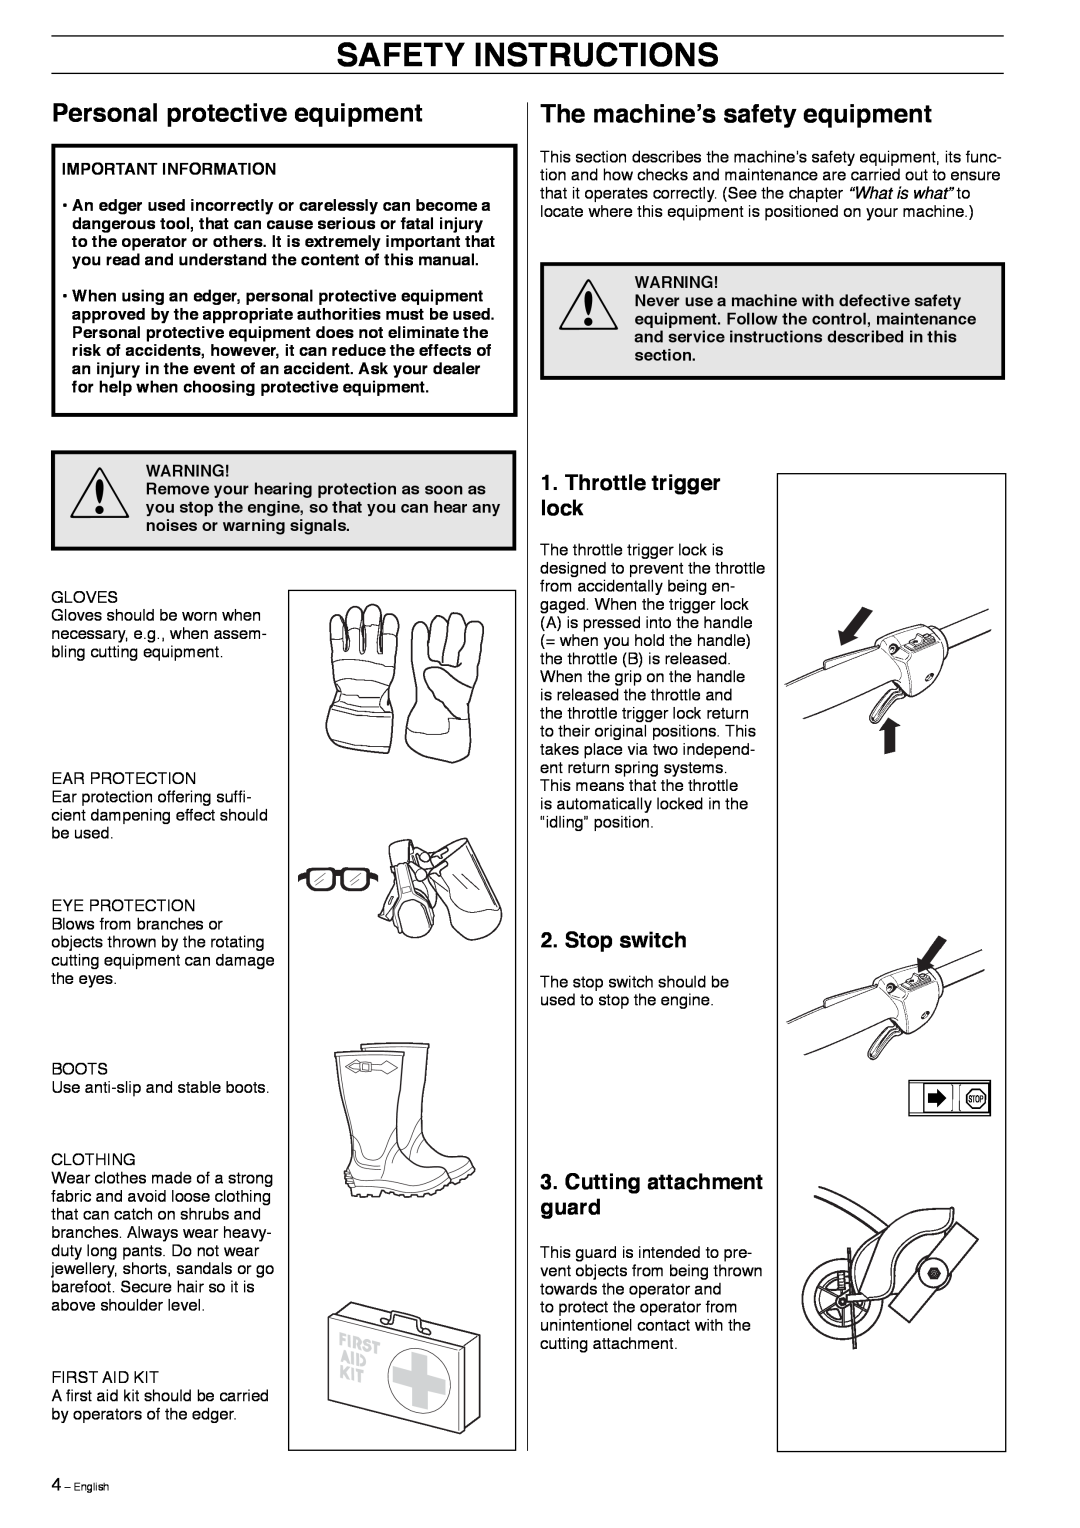 Husqvarna 323E Safety Instructions, Personal protective equipment, The machineʼs safety equipment, Throttle trigger lock 